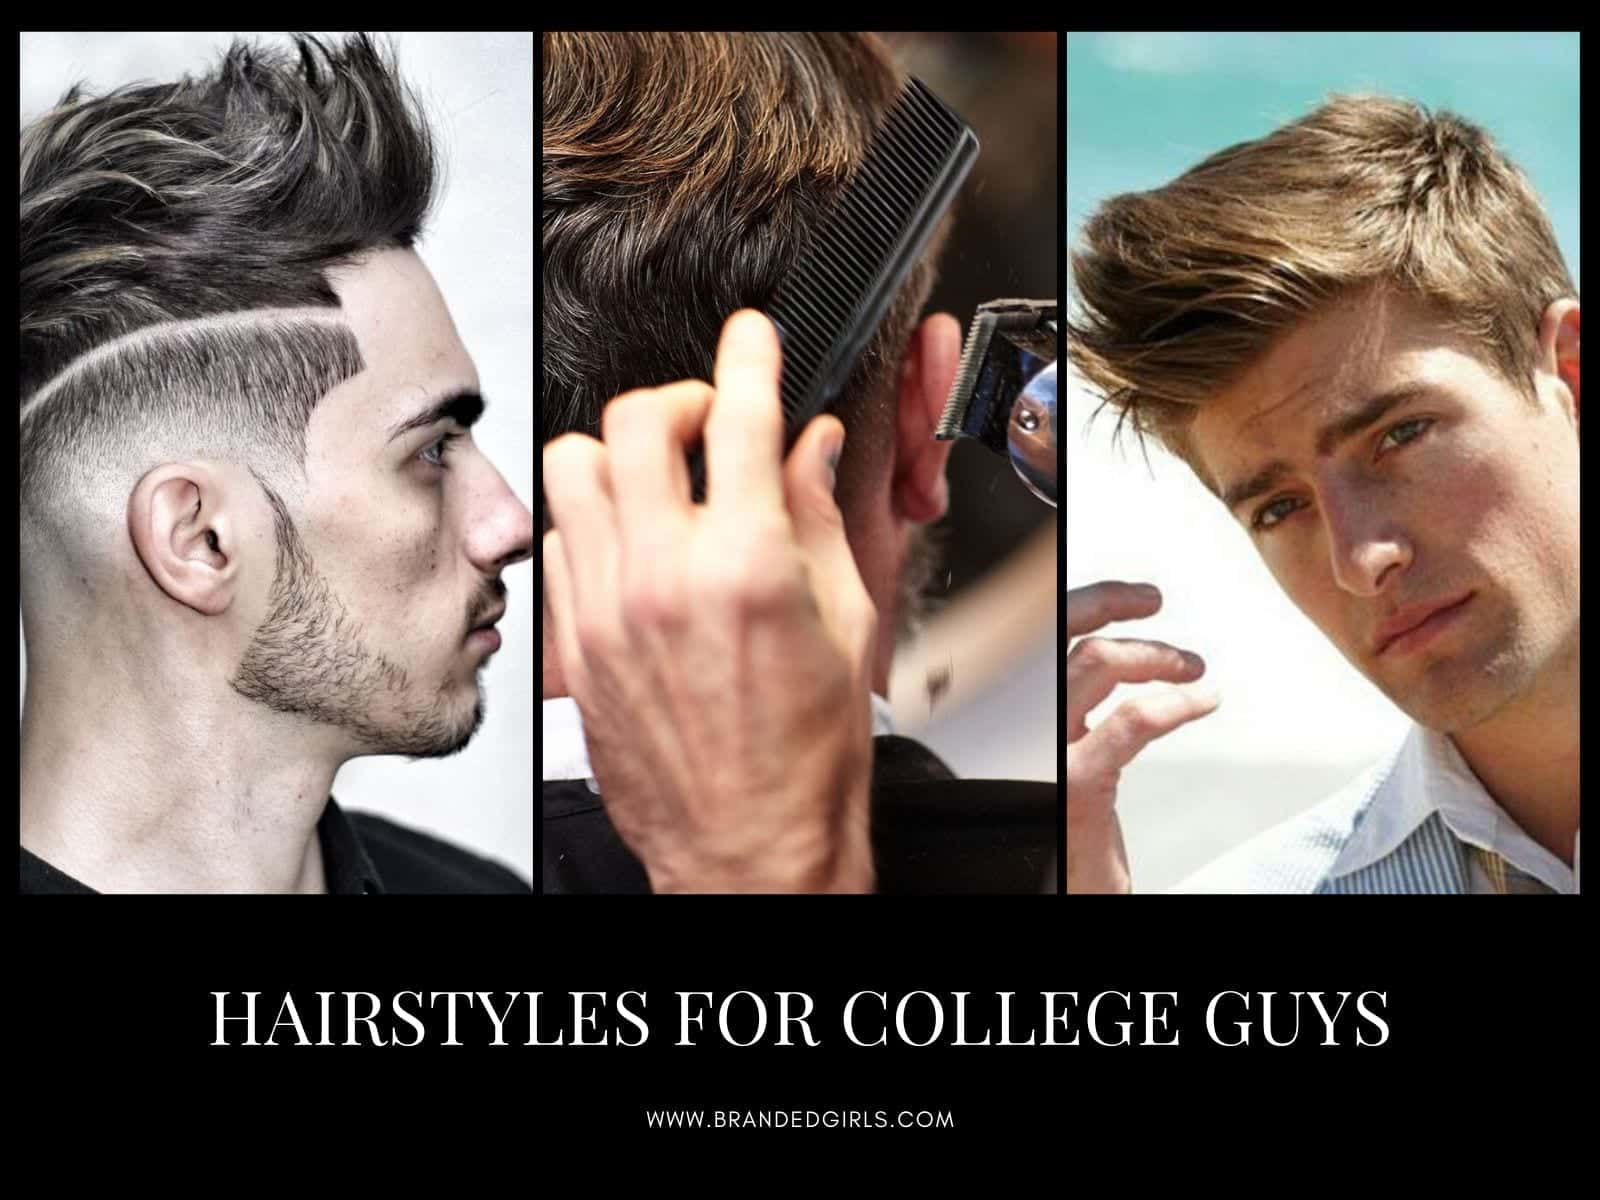 Hairstyles for College Guys